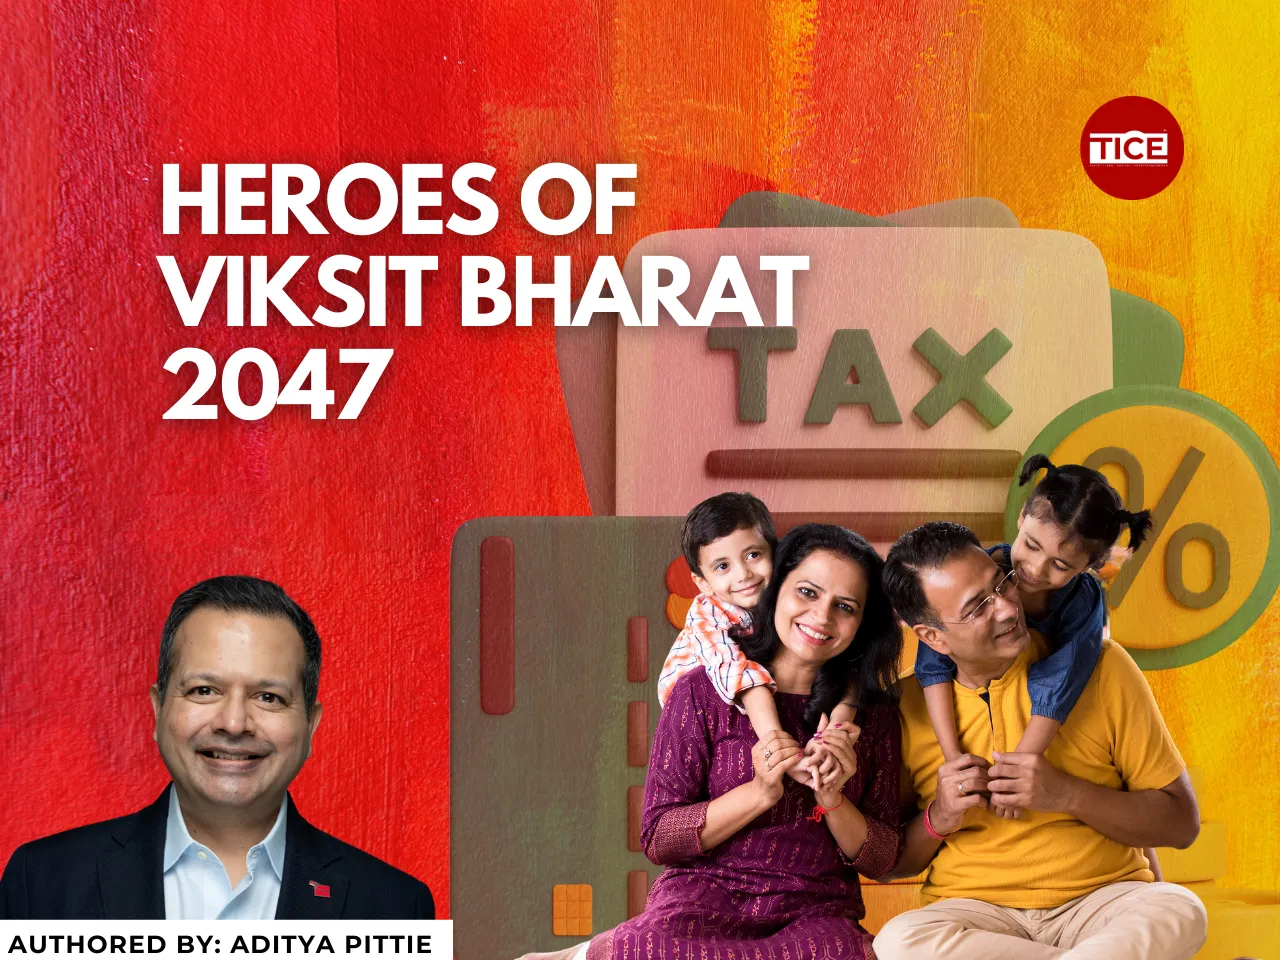 Taxpayers: The Unsung Heroes of Viksit Bharat 2047